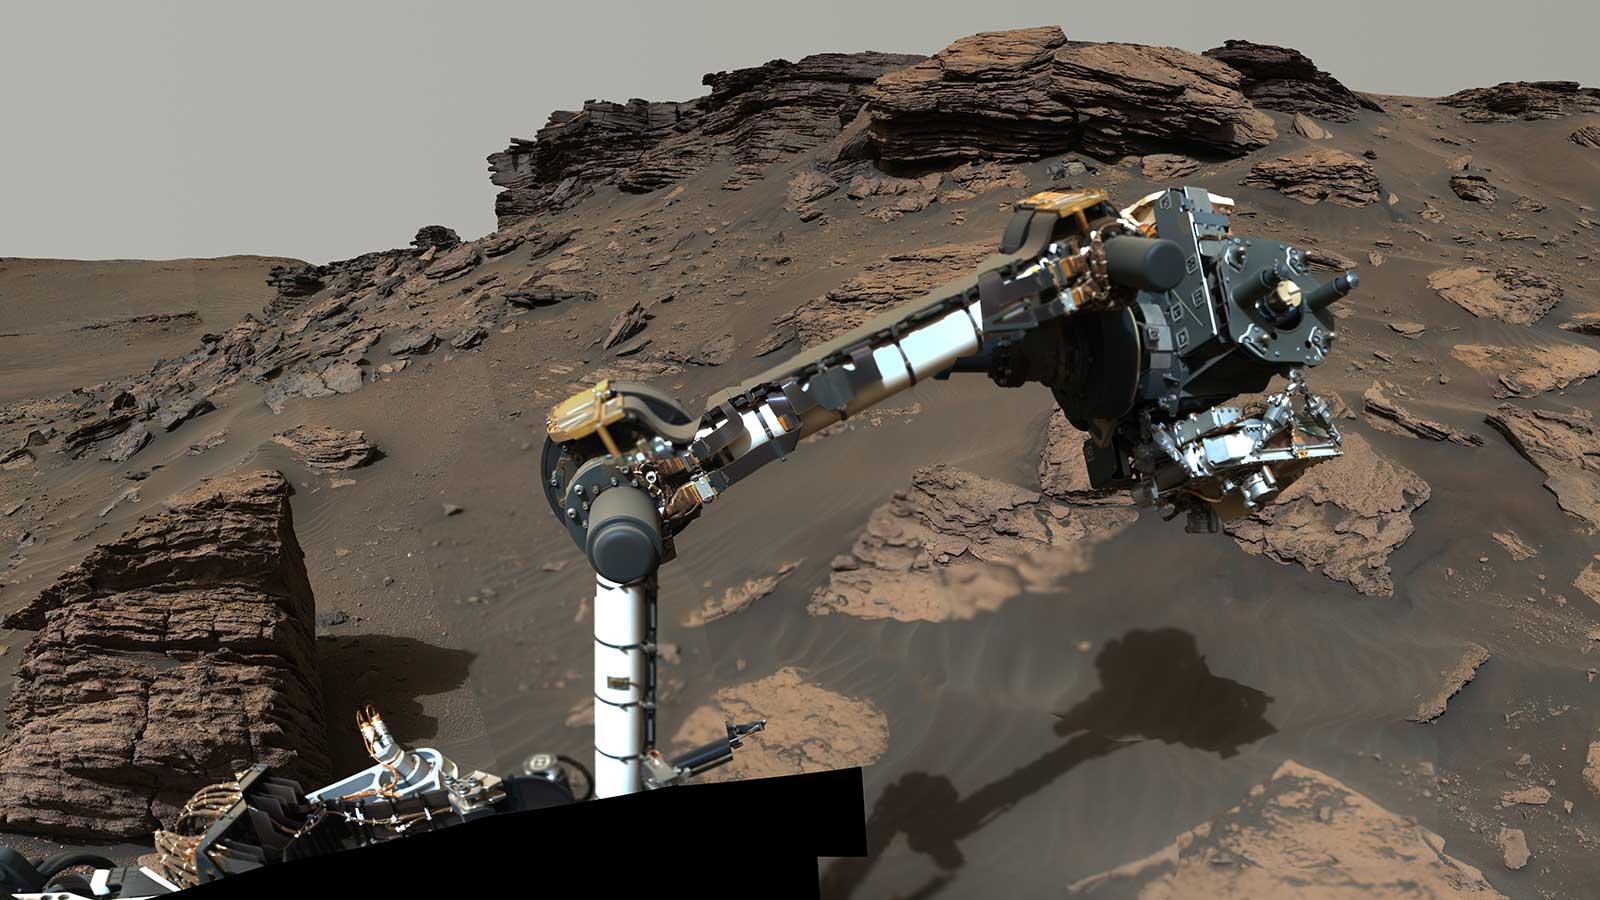 A robotic arm laden with science instruments extends toward a rocky outcrop on Mars.